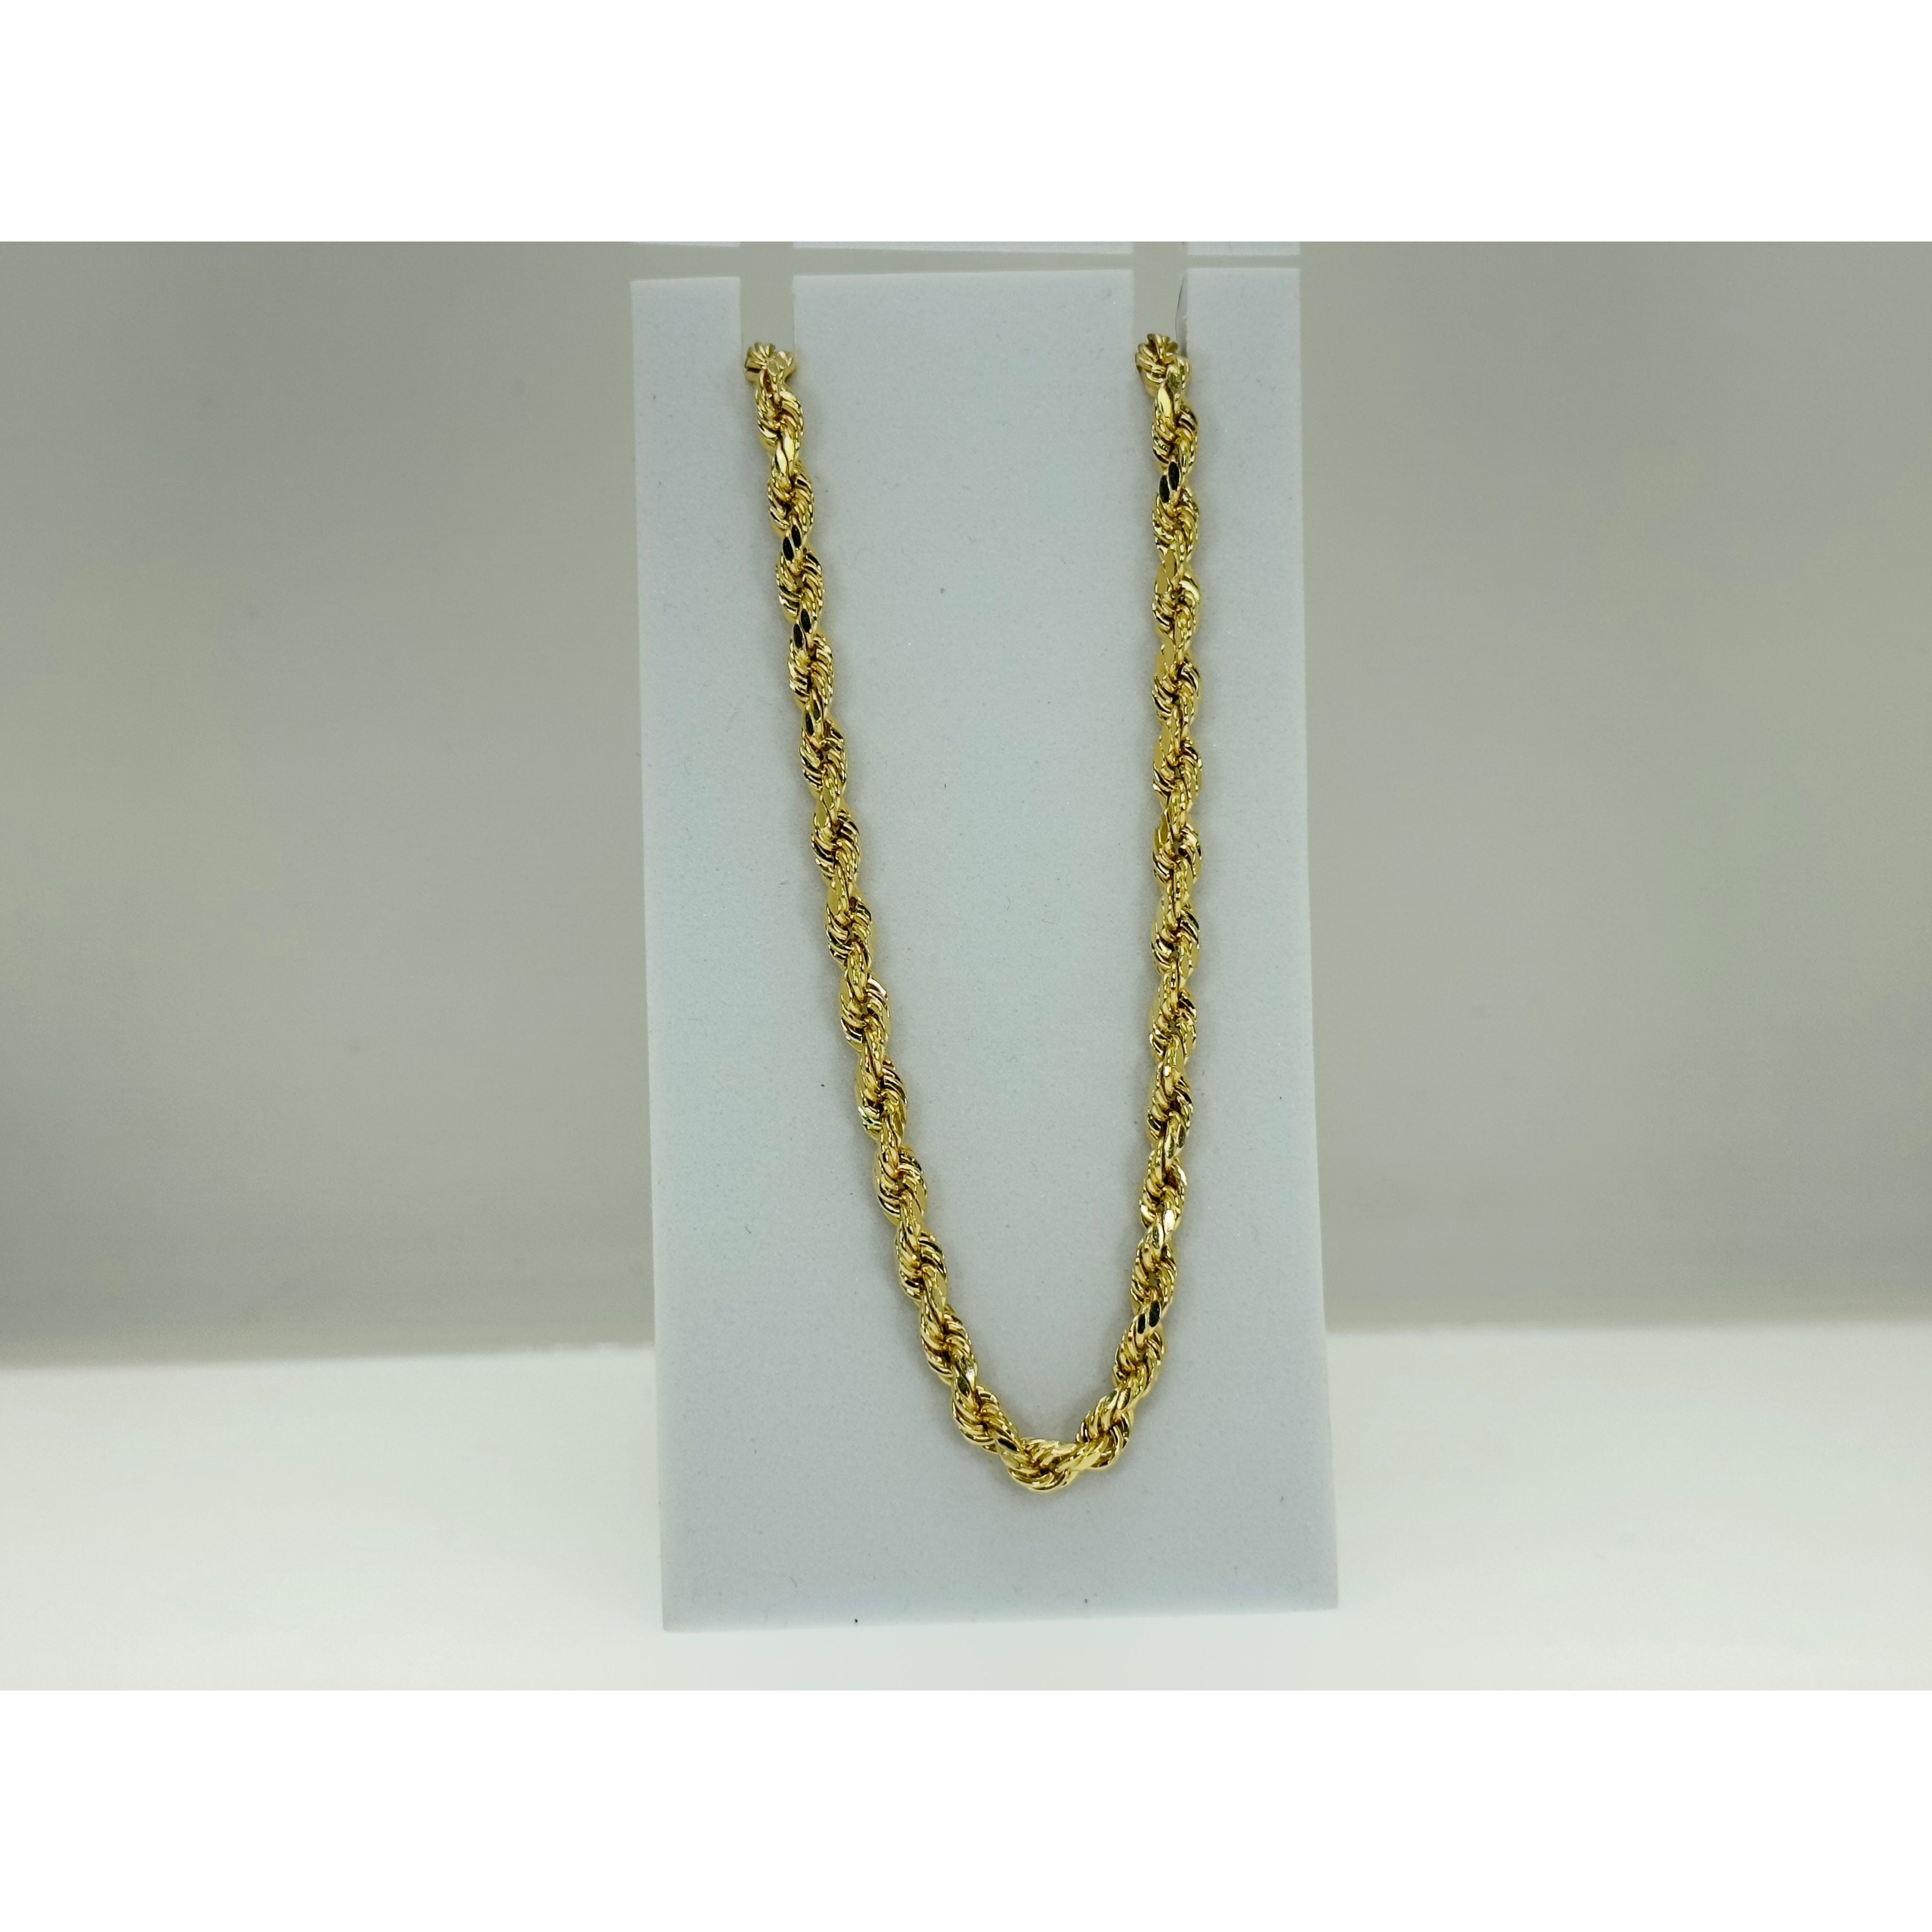 DR1731 - 14K Yellow Gold - Men's Gold Chains